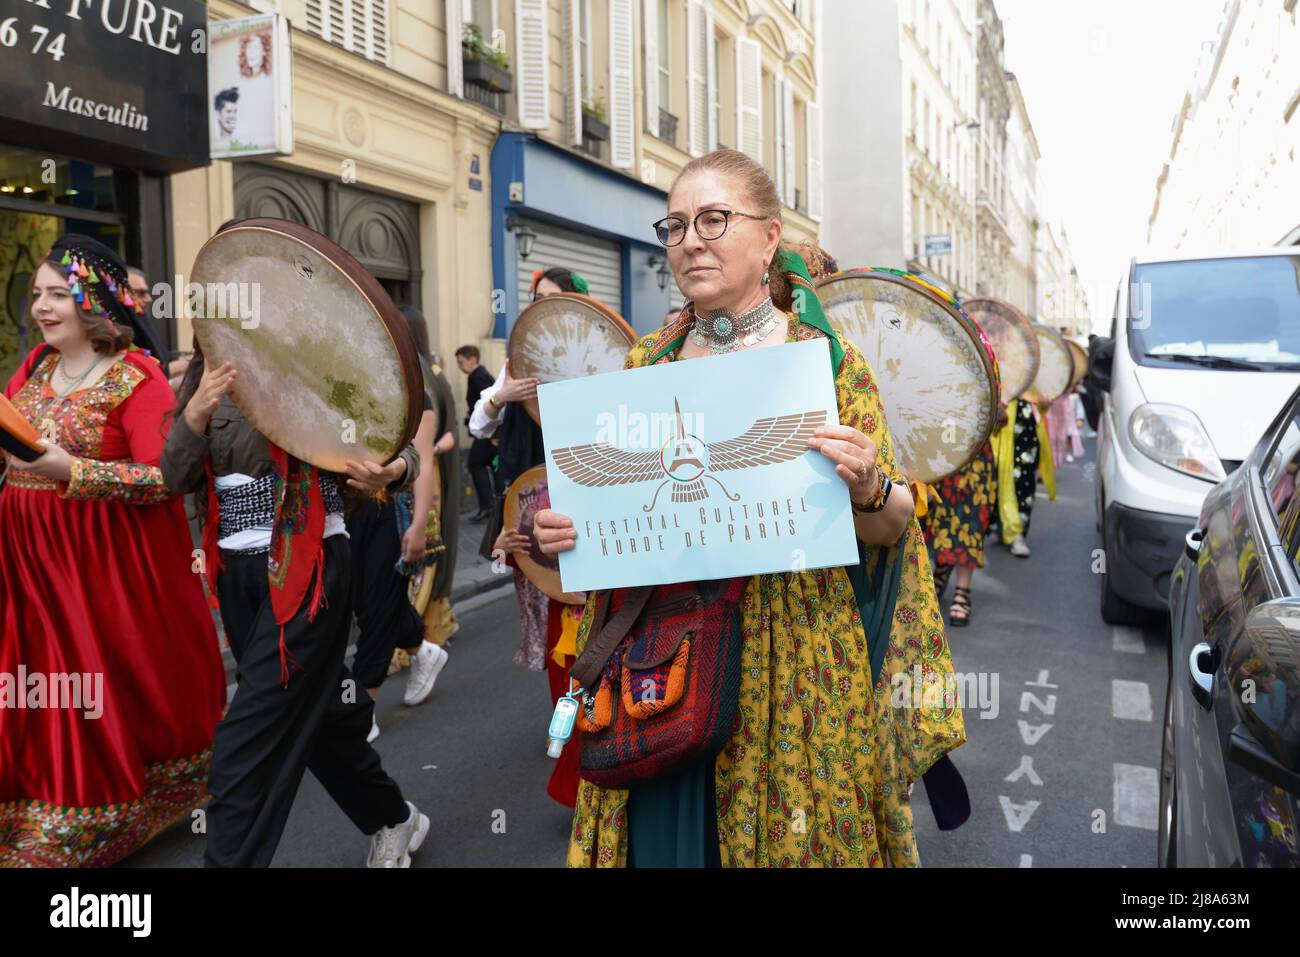 1st Kurdish cultural festival in Paris. A parade in traditional costumes and street orchestra took place in the 10th arrondissement of Paris Stock Photo